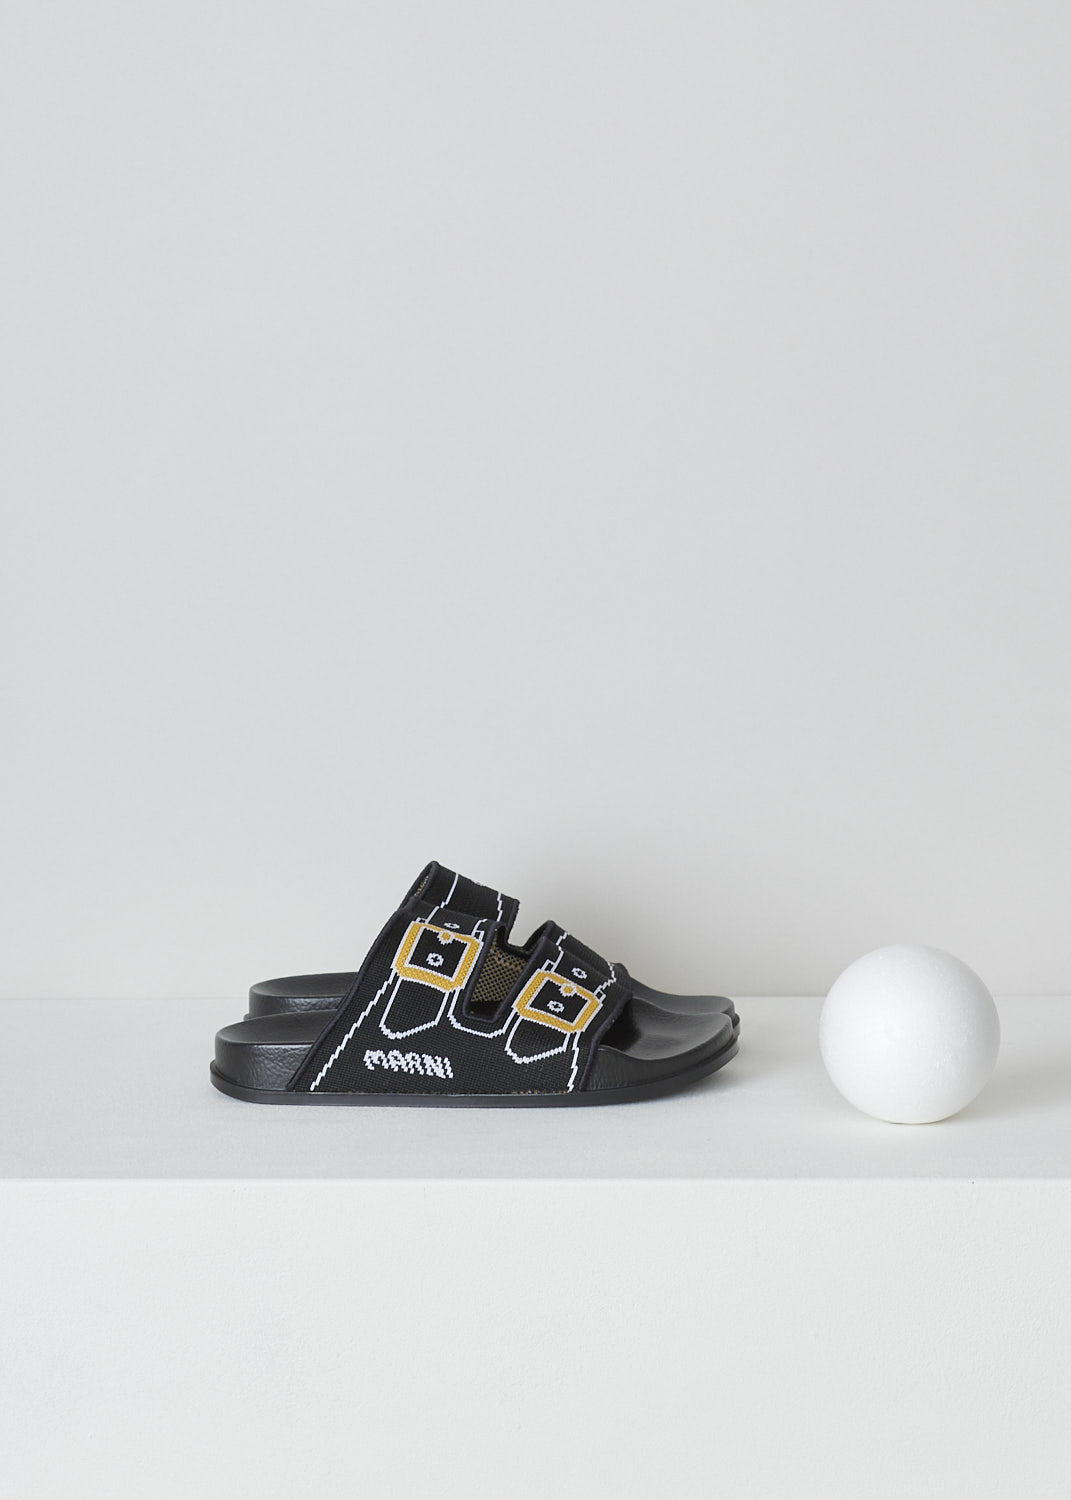 MARNI, BLACK TROMPE L'OEIL JACQUARD SLIDES, SAMS015802_P4547_ZO137, Black, Side, These black knitted slides have a trompe l'oeil image woven into the straps across the vamp. The image depicts straps with gold buckles. The brand's logo is woven into the side. These slip-on slides have a round open toe. The slides have a molded footbed and a flat rubber sole. 
 
 
